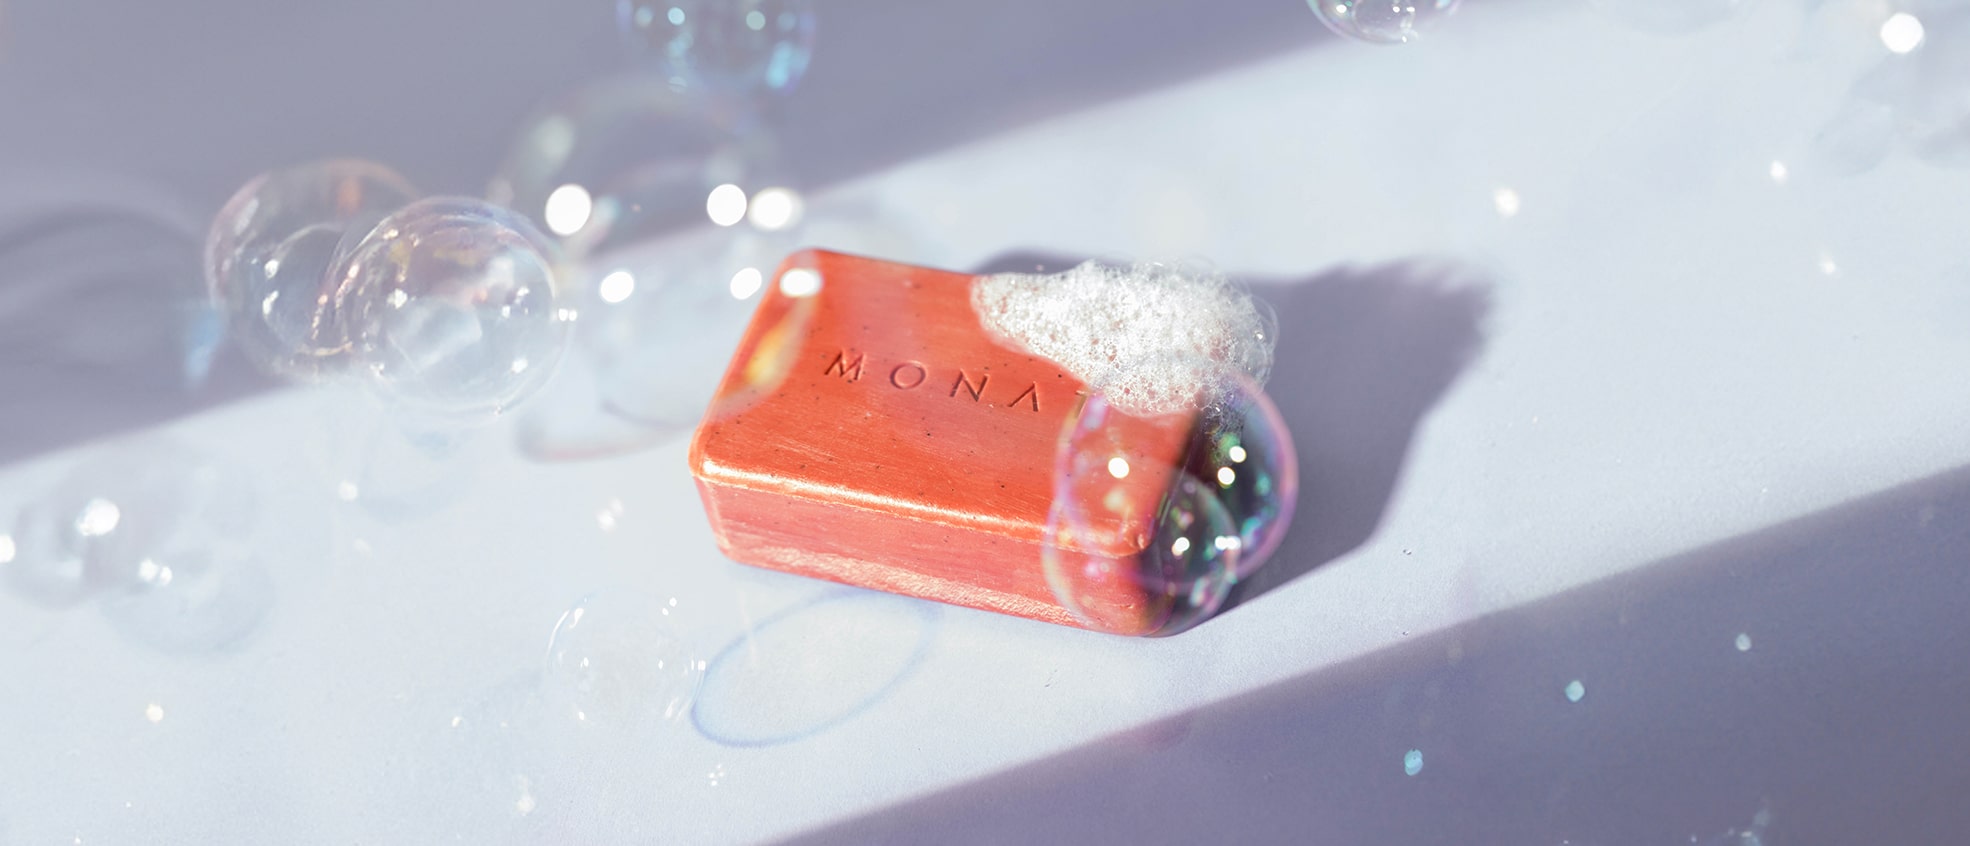 MONAT body bar with bubbles on it, resting on a wet surface.